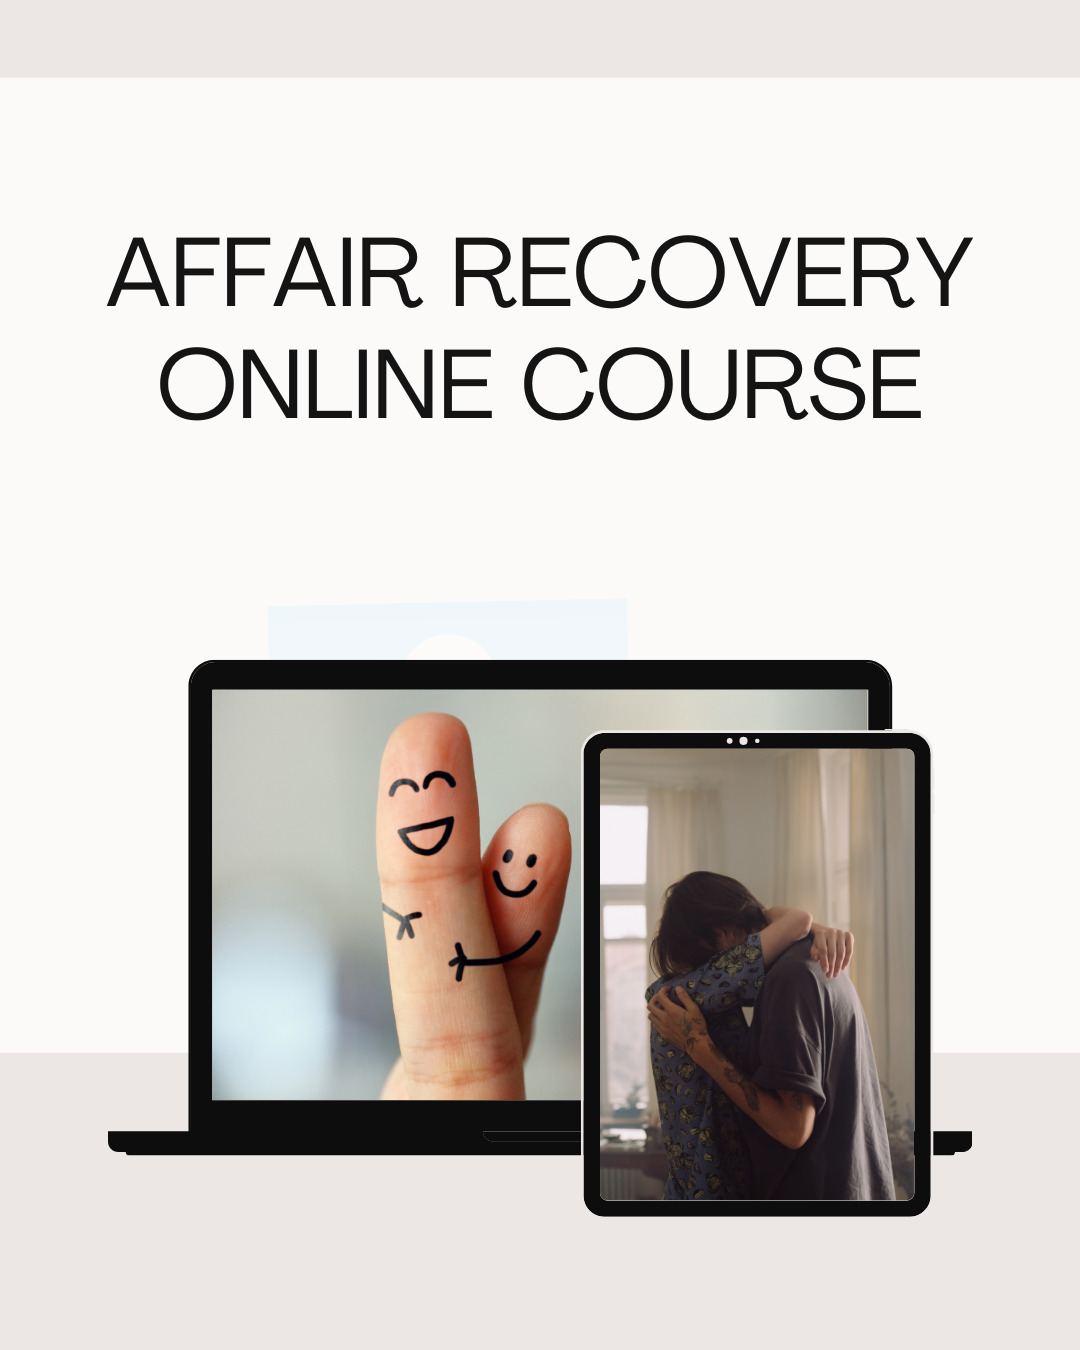 Affair Recovery Online Course